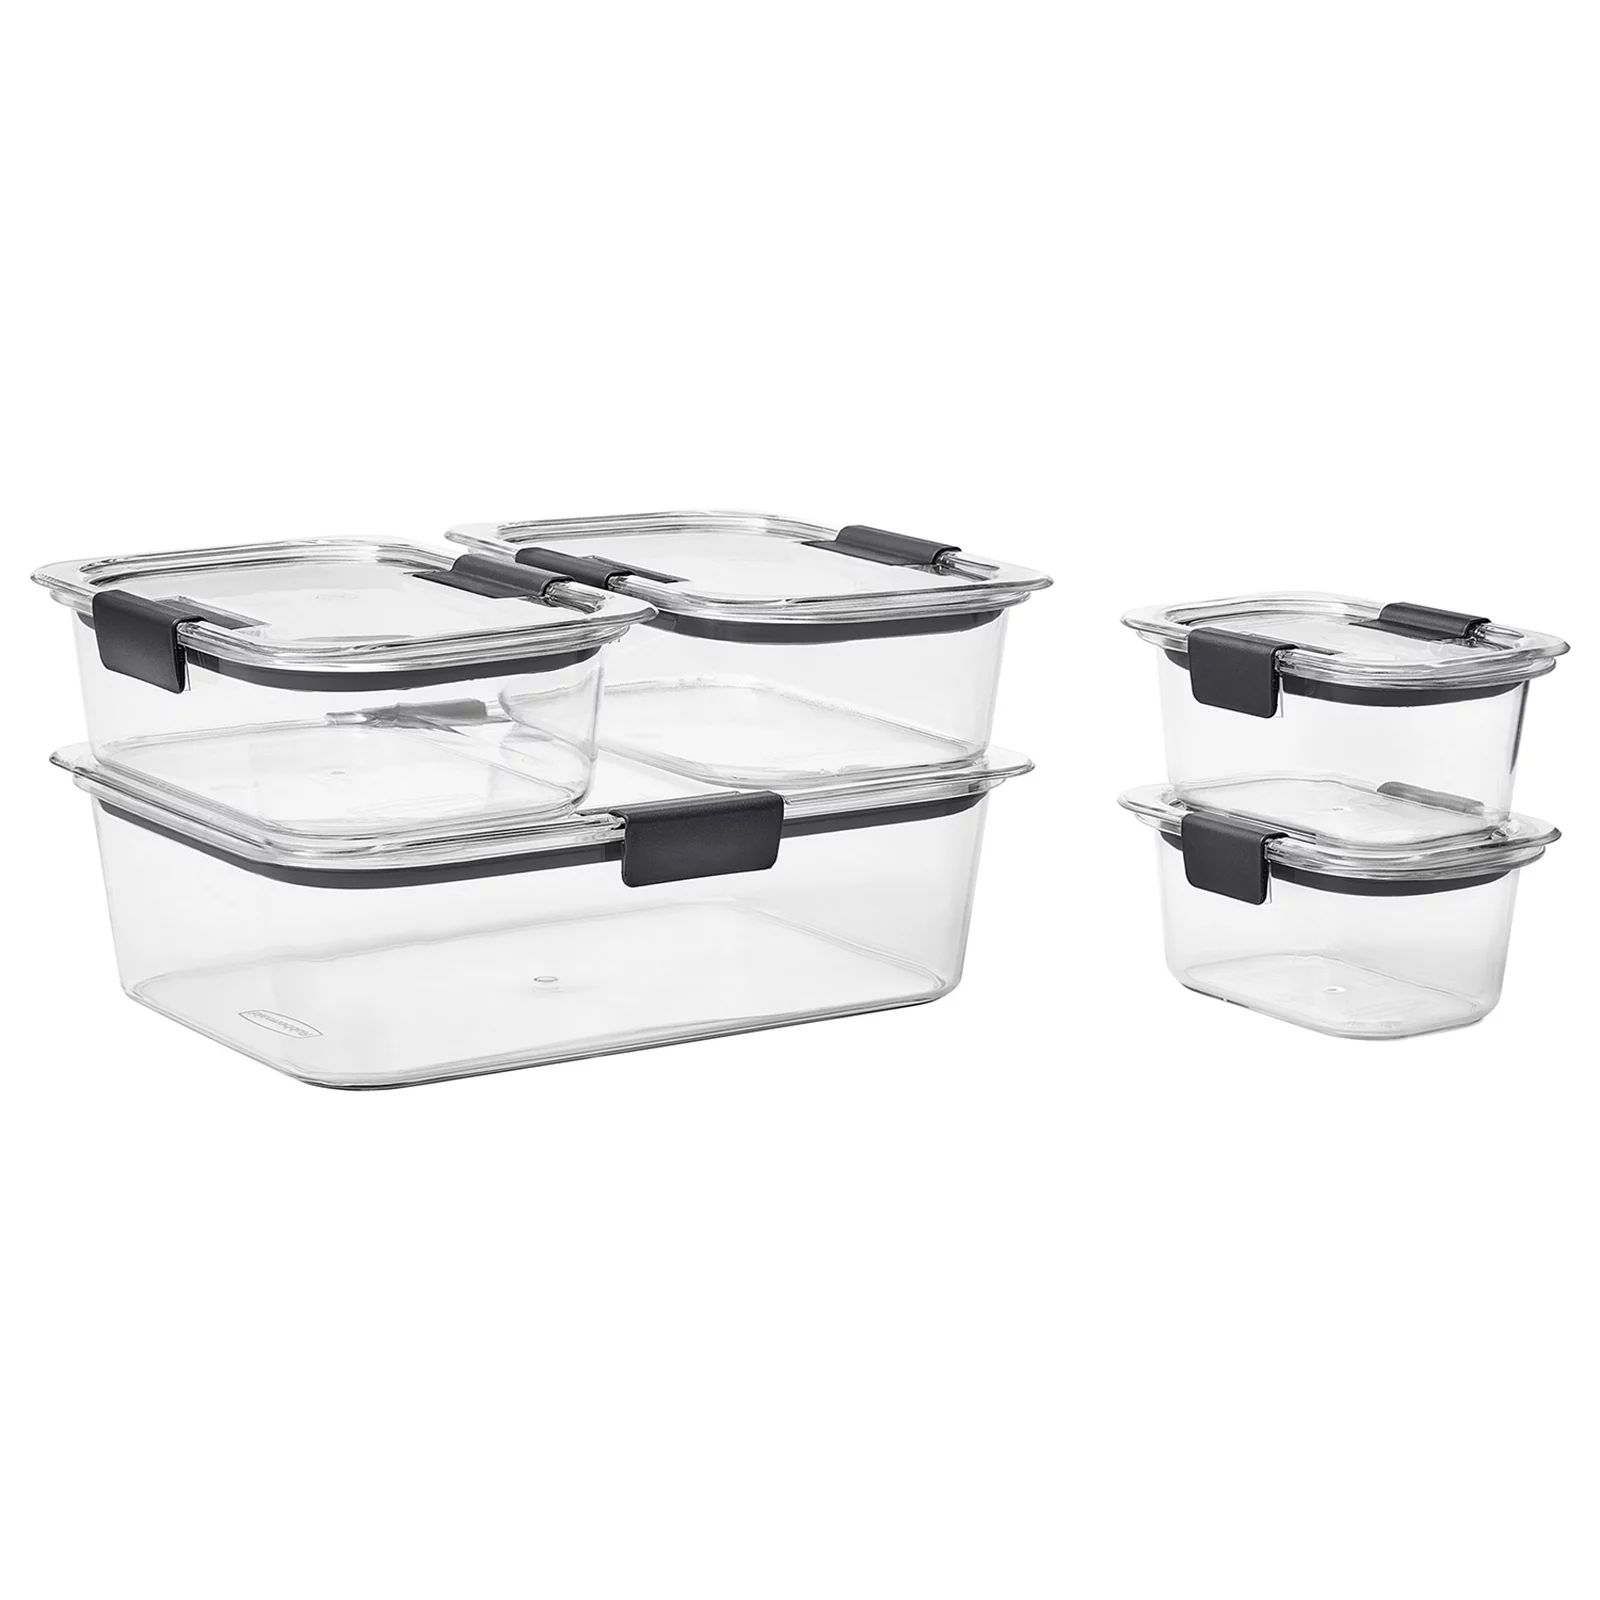 Rubbermaid Brilliance 10-Piece Food Storage Containers Set | Kohl's